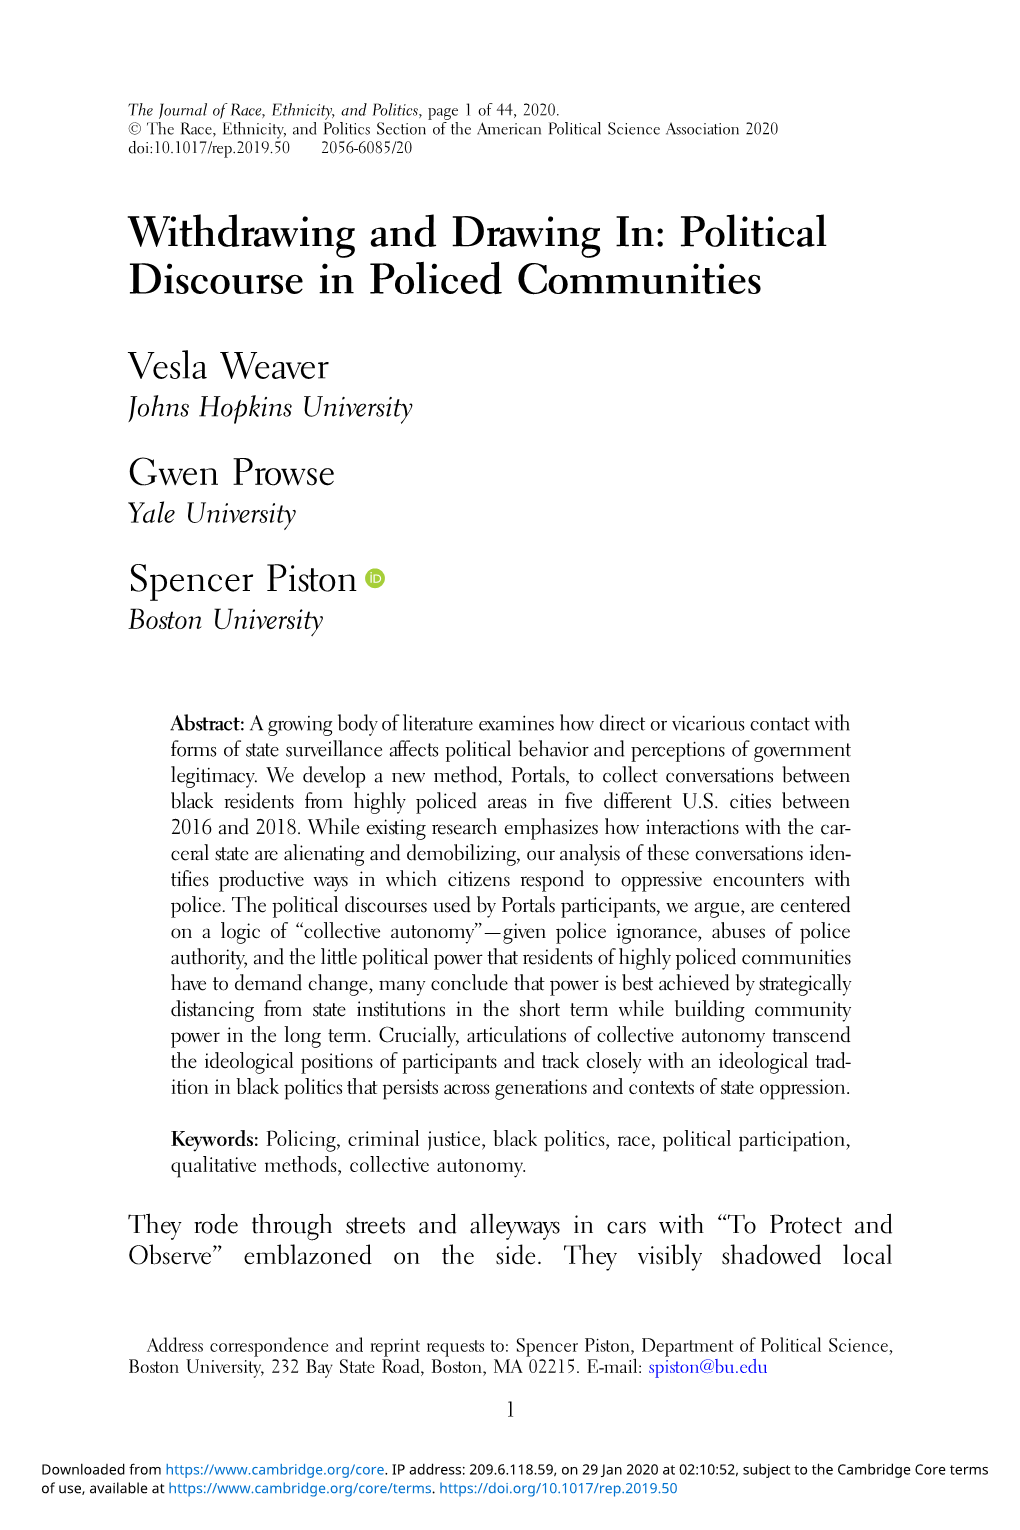 Withdrawing and Drawing In: Political Discourse in Policed Communities